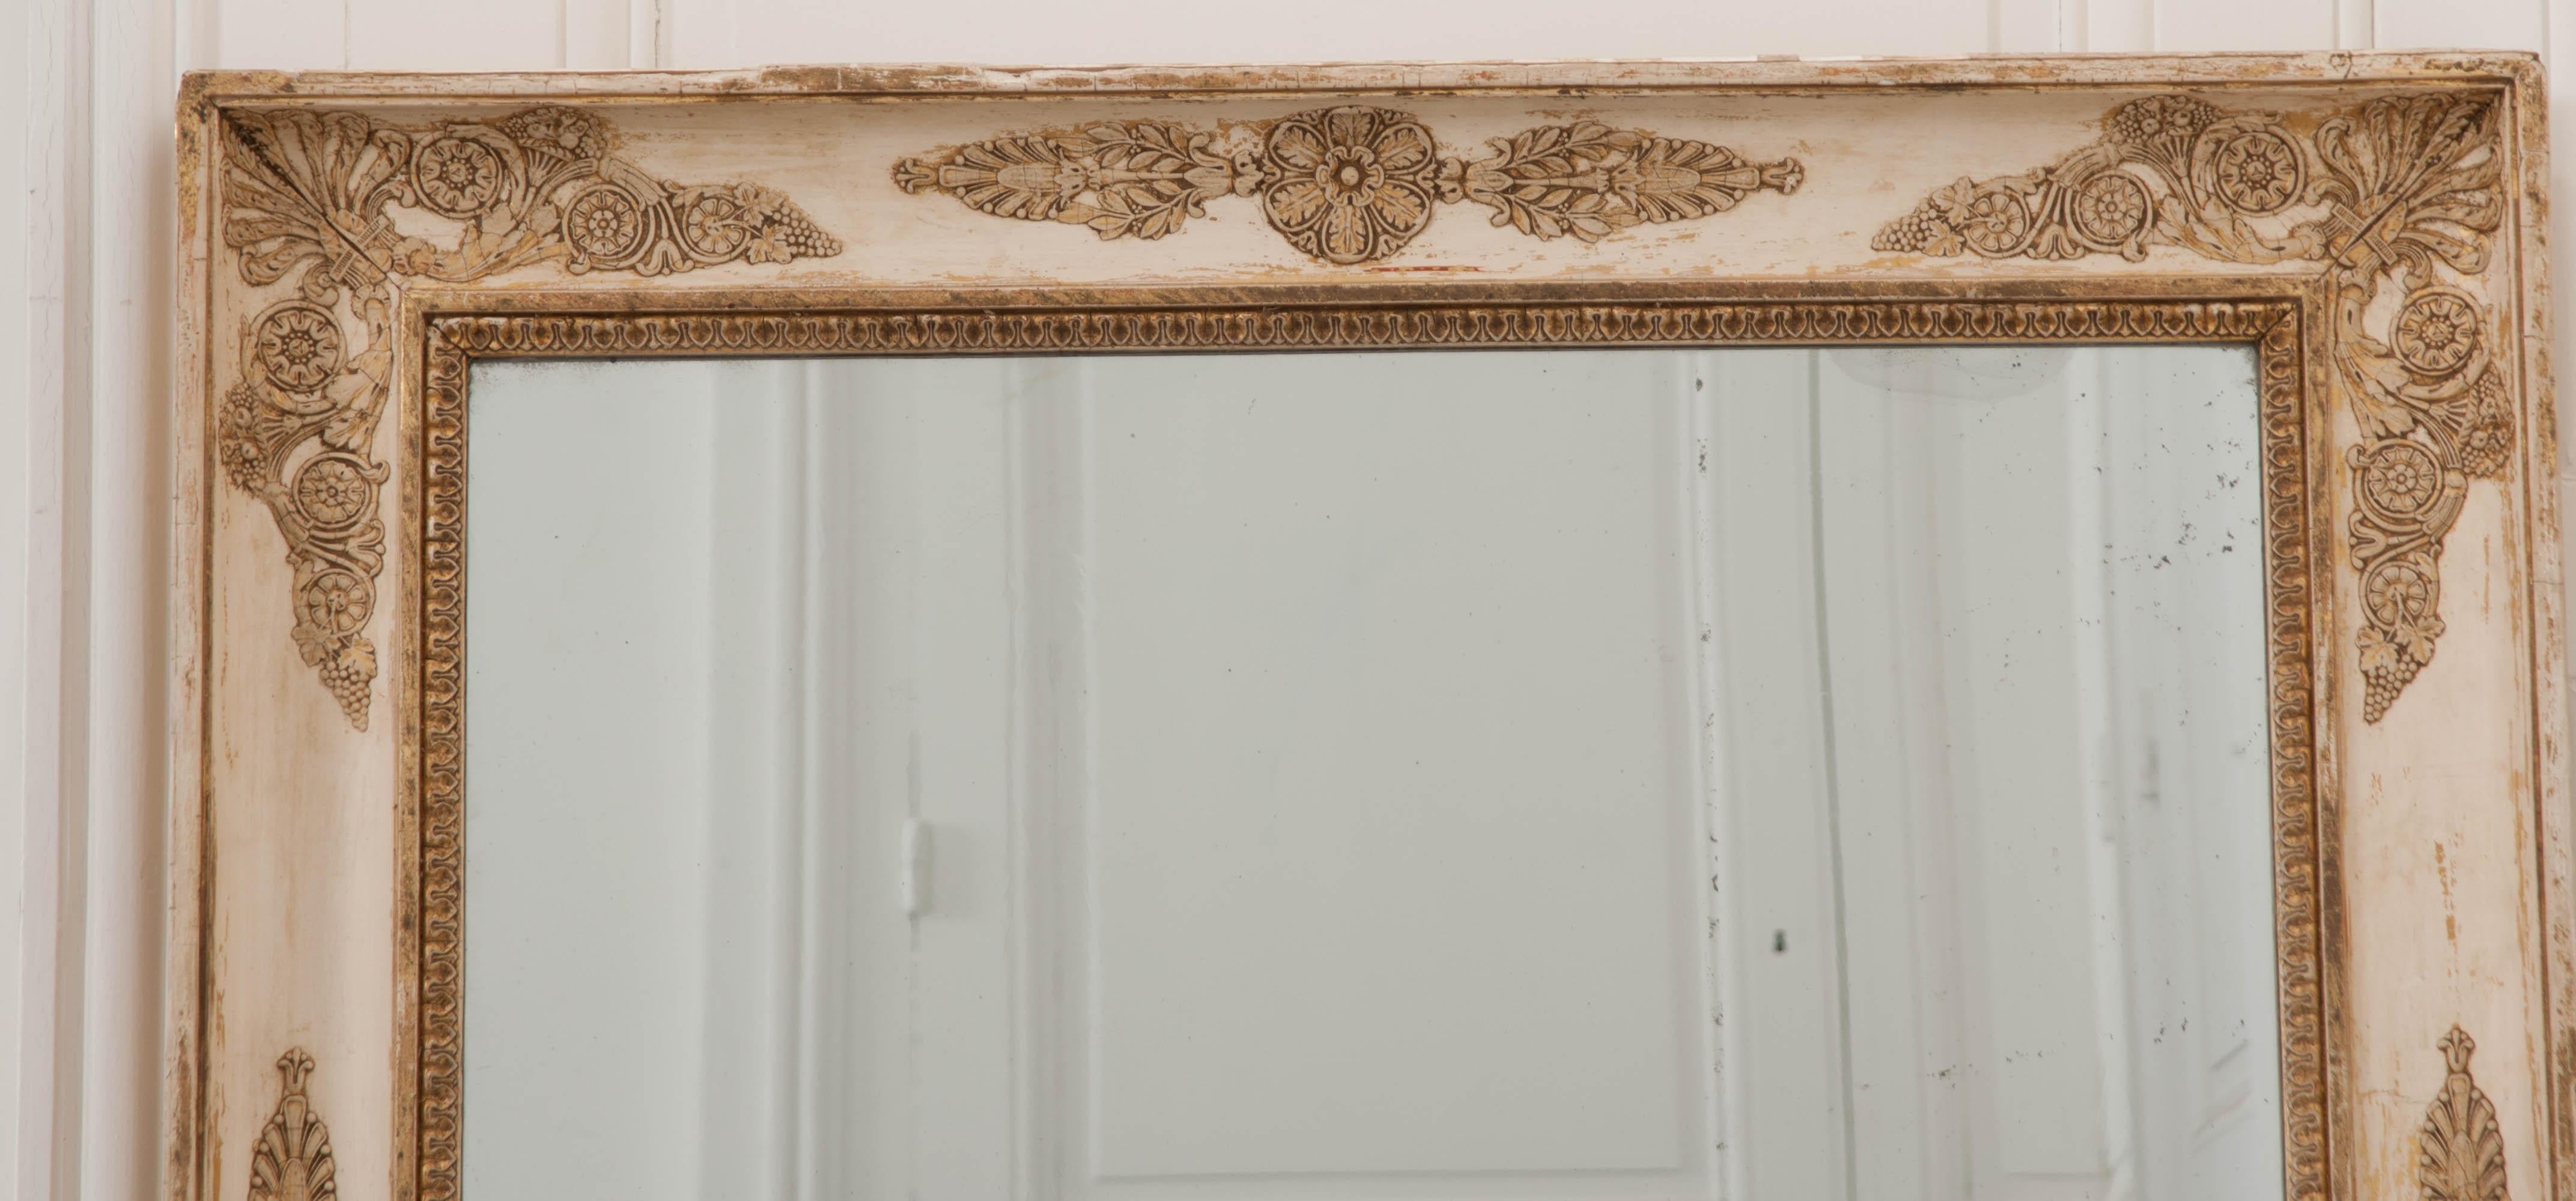 A fabulous Empirically styled rectilinear mirror from 1870s France. The mirror’s frame has lost much of its original gold gilt, but has retained all of its regal beauty. Detailed motifs in grape, rosette, scrolled acanthus and palm styles embellish